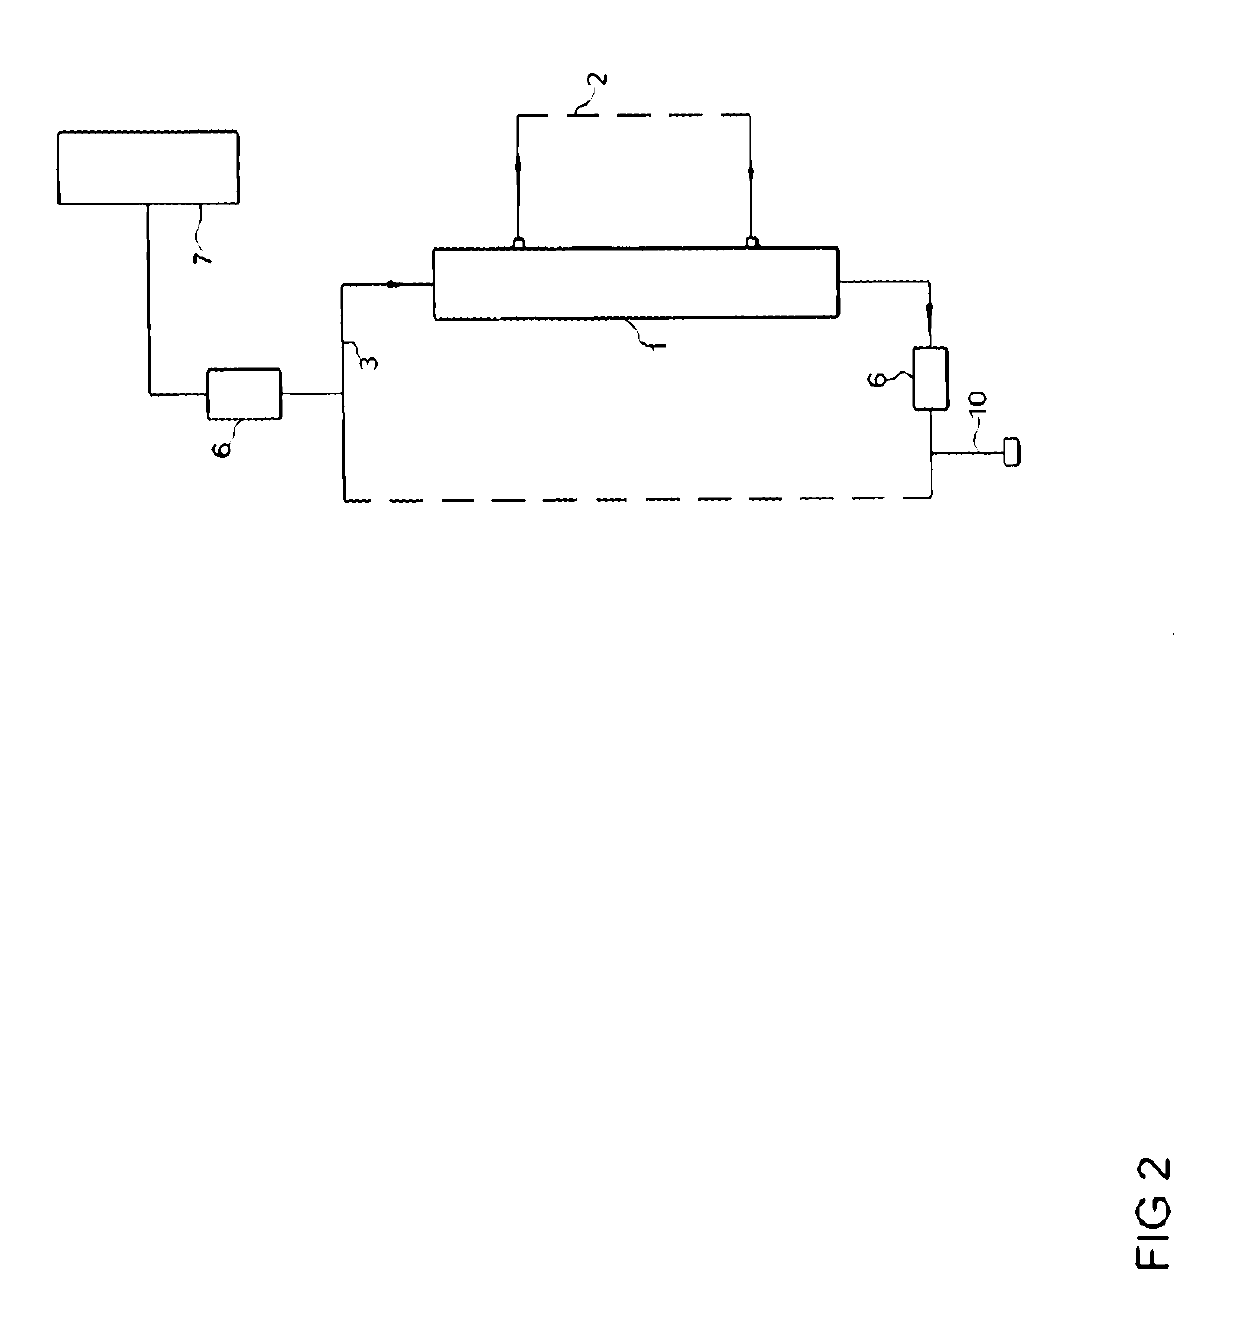 Systems or apparatuses and methods for performing dialysis